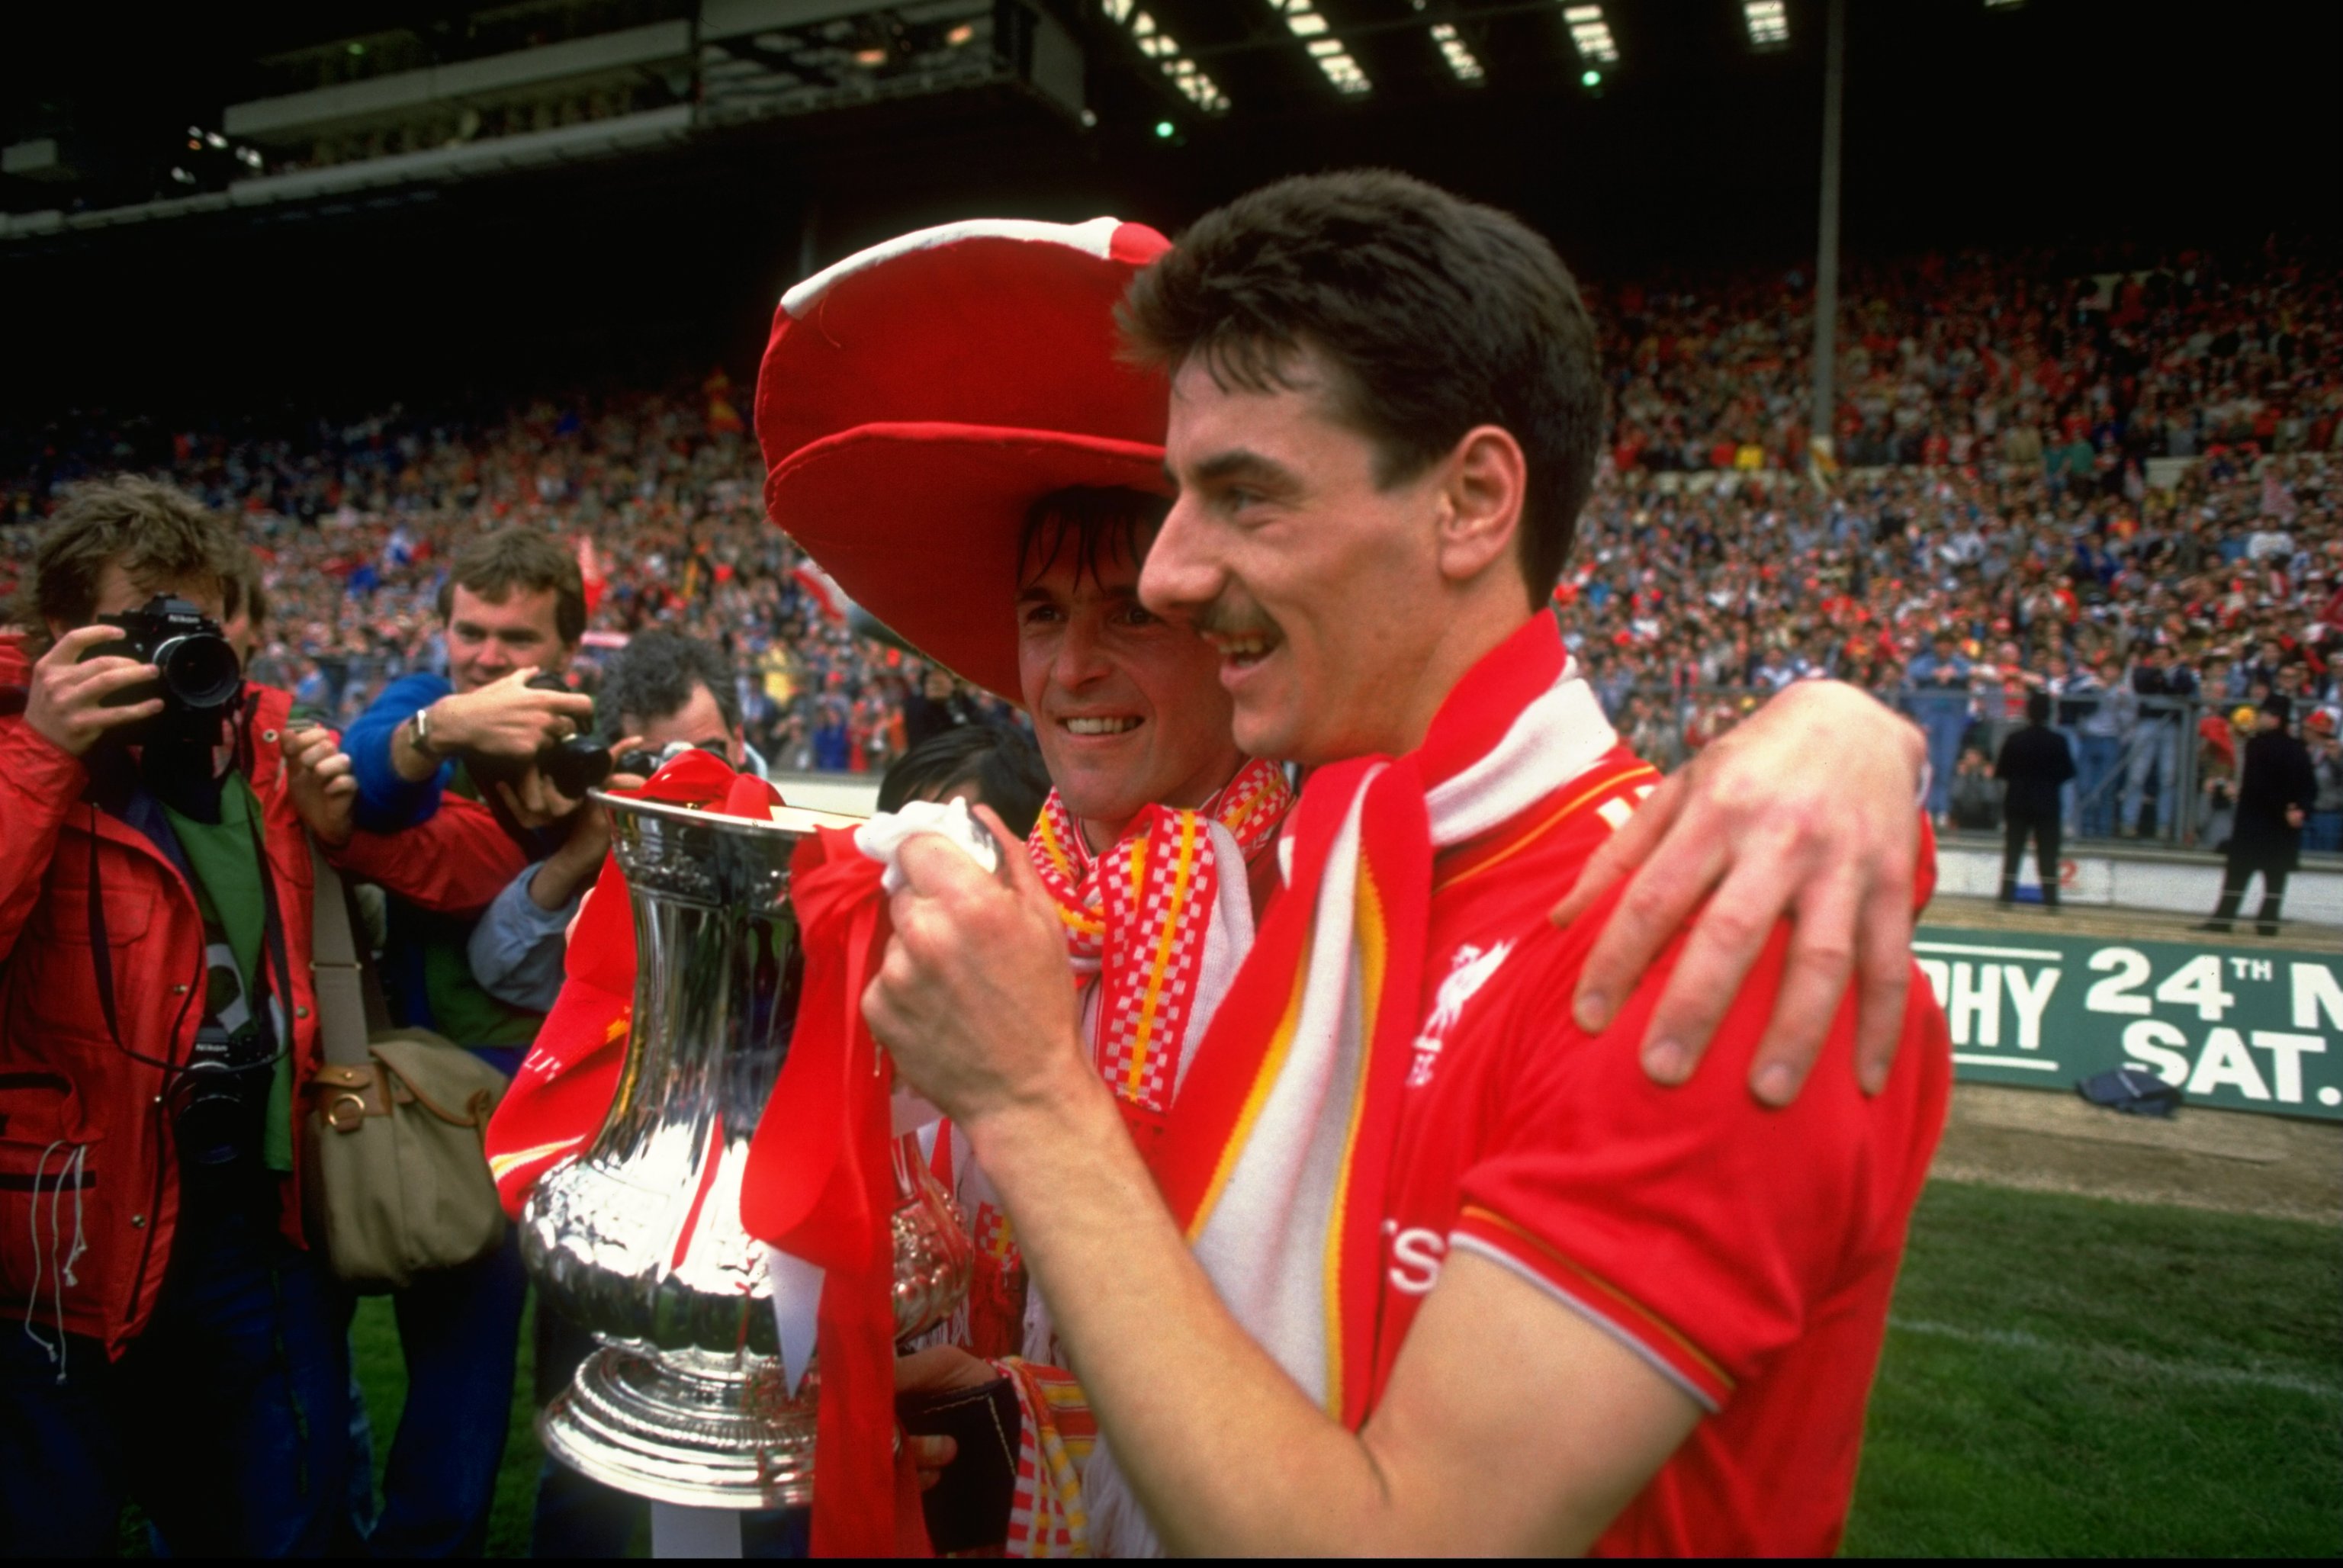 May 1986:  Kenny Dalglish (left) and Ian Rush of Liverpool pose with the trophy after the FA Cup final against Everton at Wembley Stadium in England. Liverpool won the match 3-1. \ Mandatory Credit: David  Cannon/Allsport